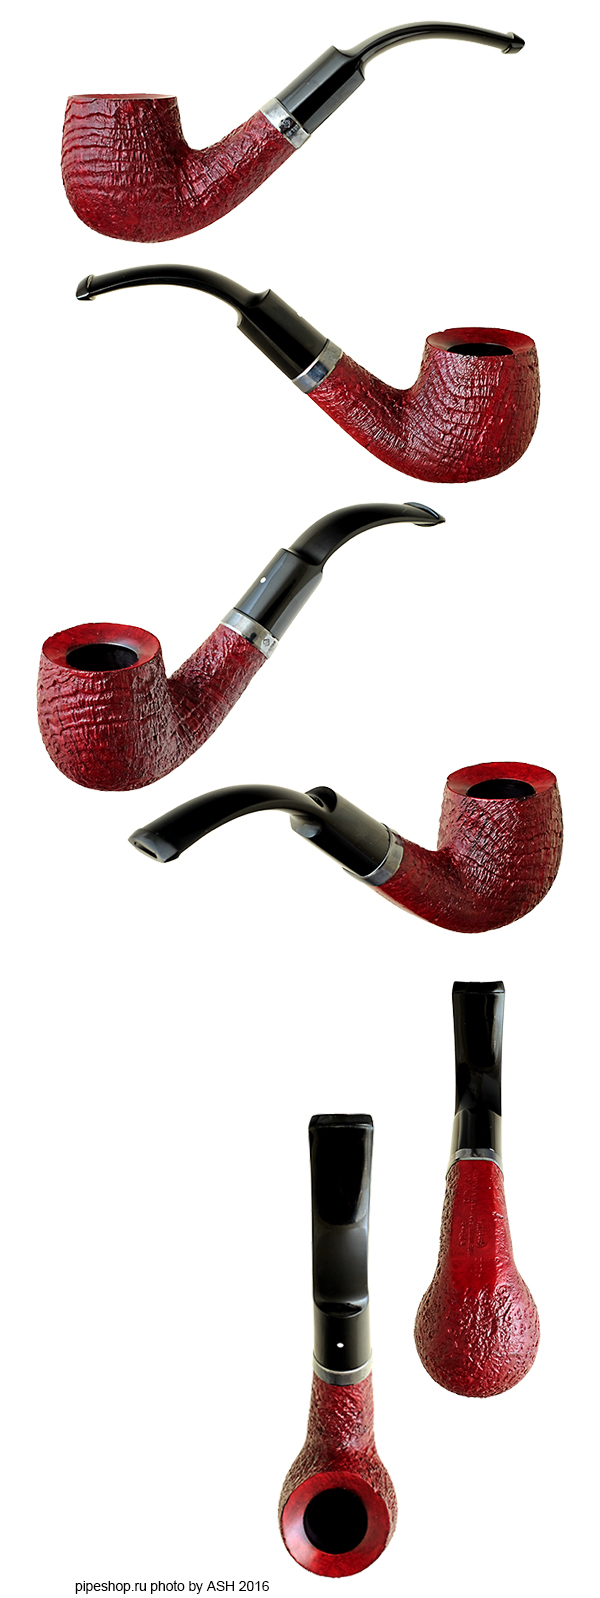   ALFRED DUNHILL`S THE WHITE SPOT RUBYBARK 4202 BENT (2016)